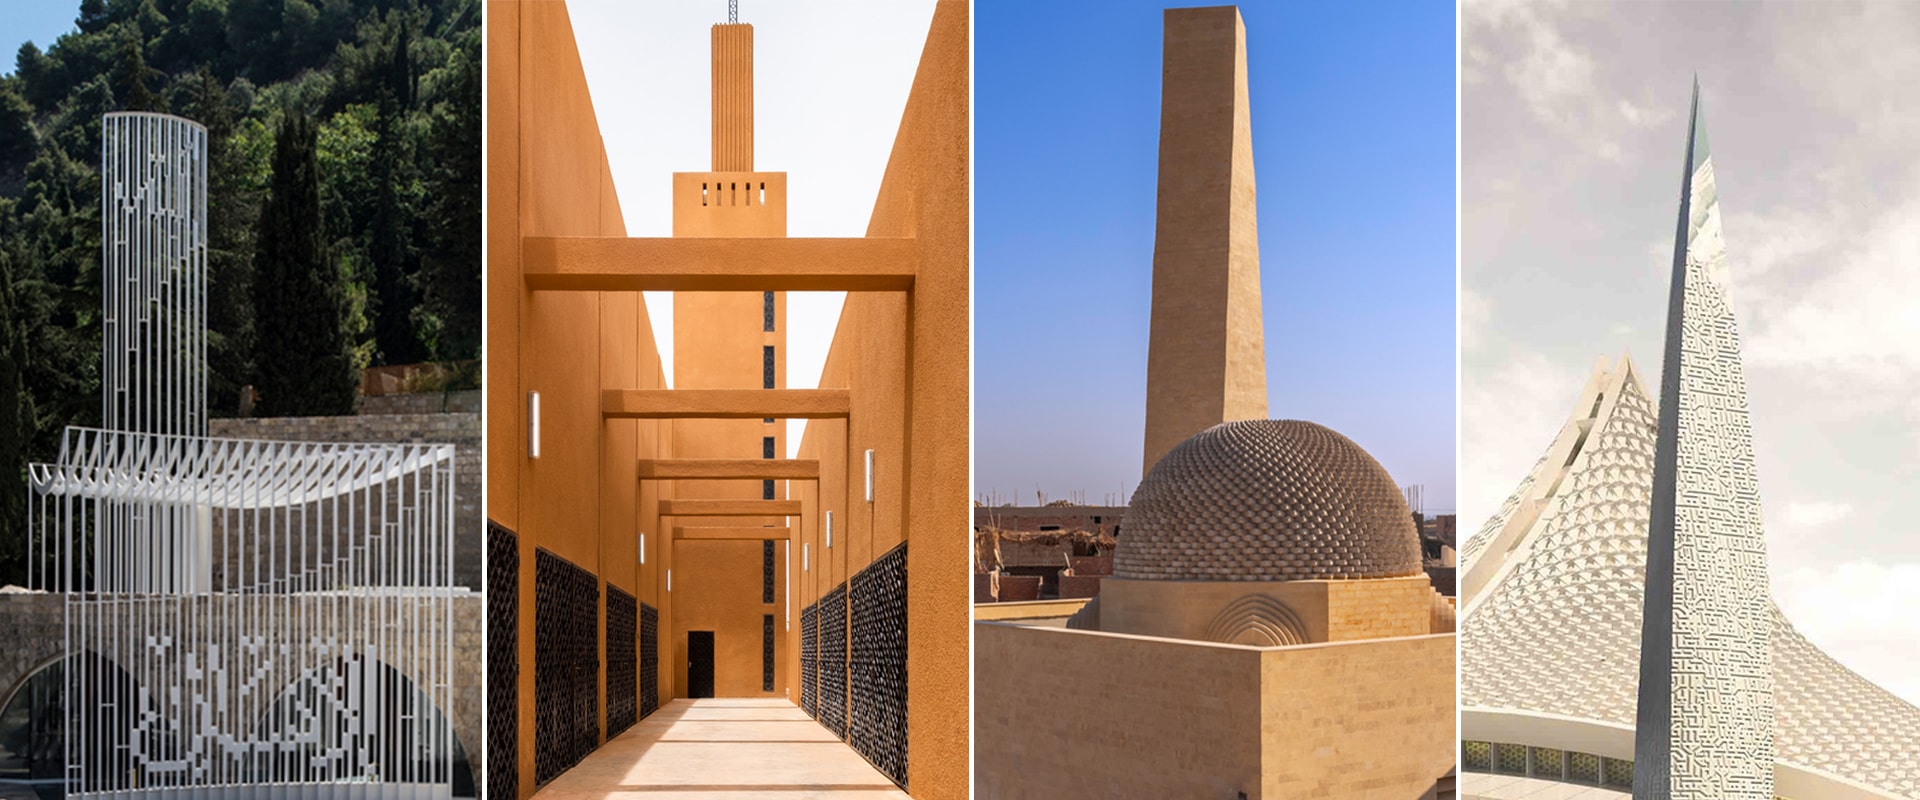 Exploring the Art and Architecture of Different Cultures